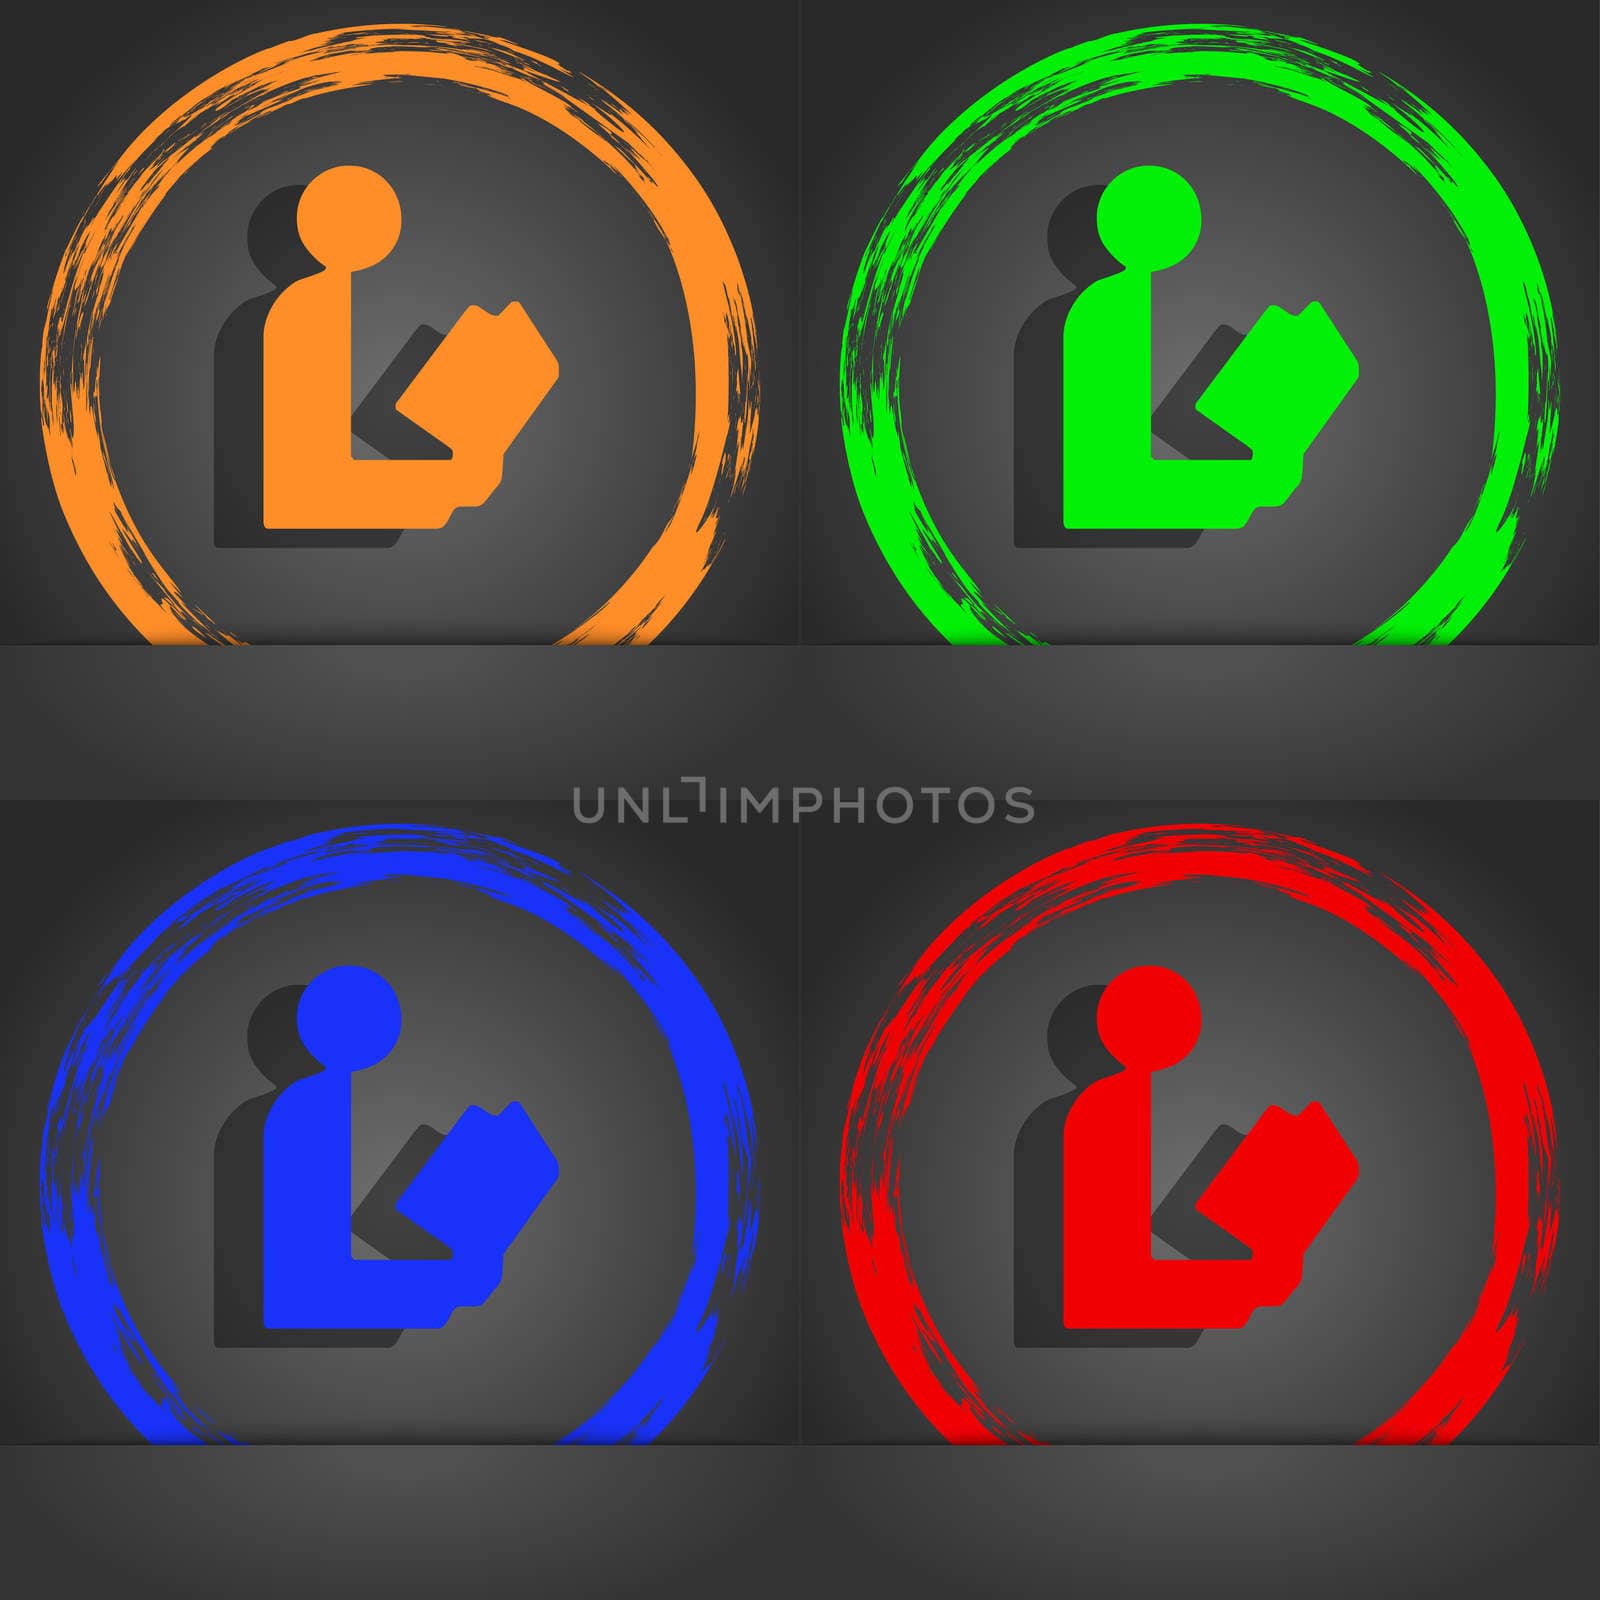 read a book icon symbol. Fashionable modern style. In the orange, green, blue, green design. illustration